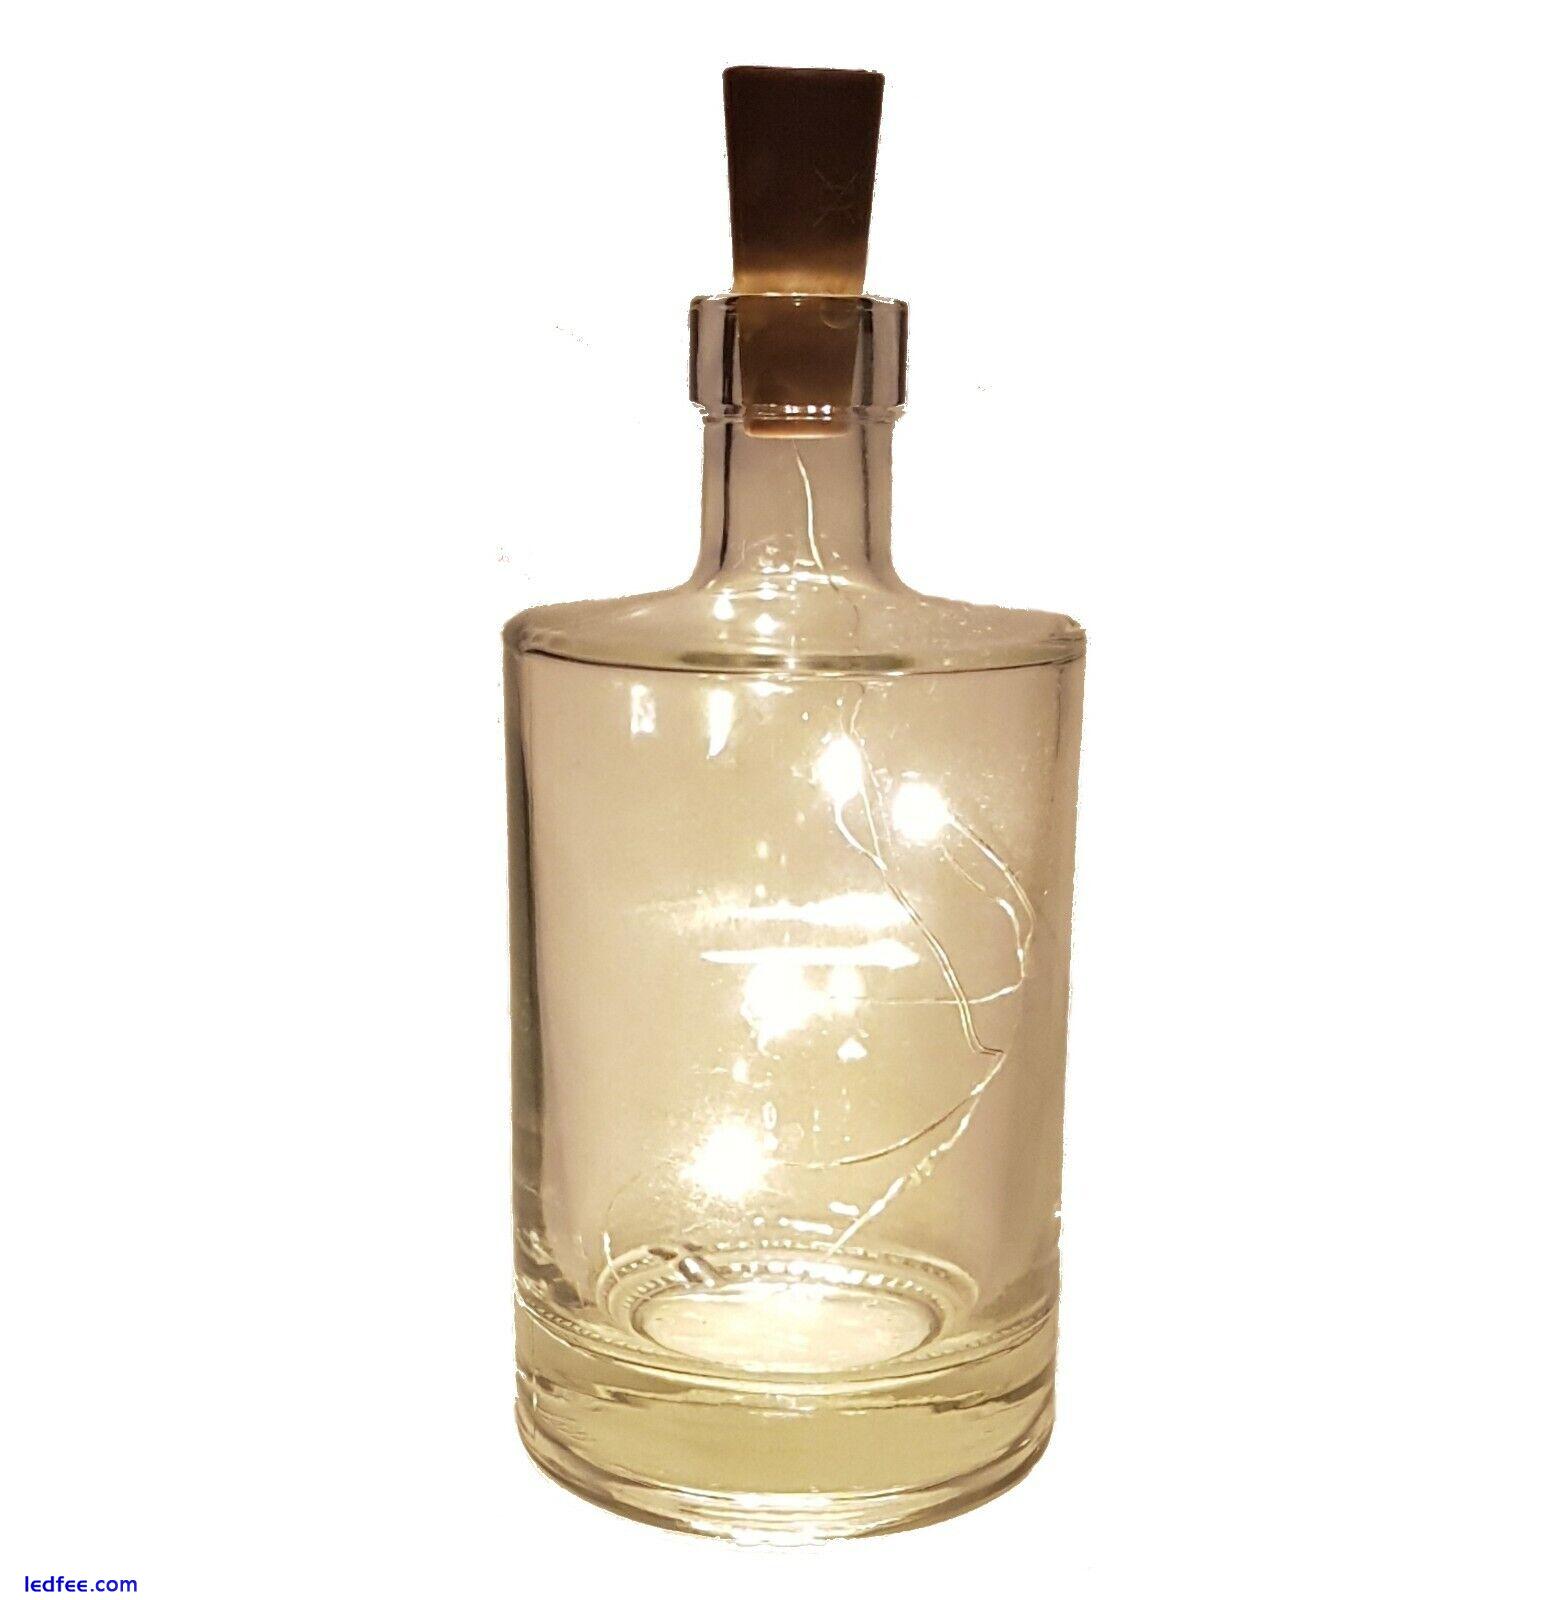 Bottle Fairy Lights on a Realistic Cork to Decorate any Bottle - Warm White LEDs 0 